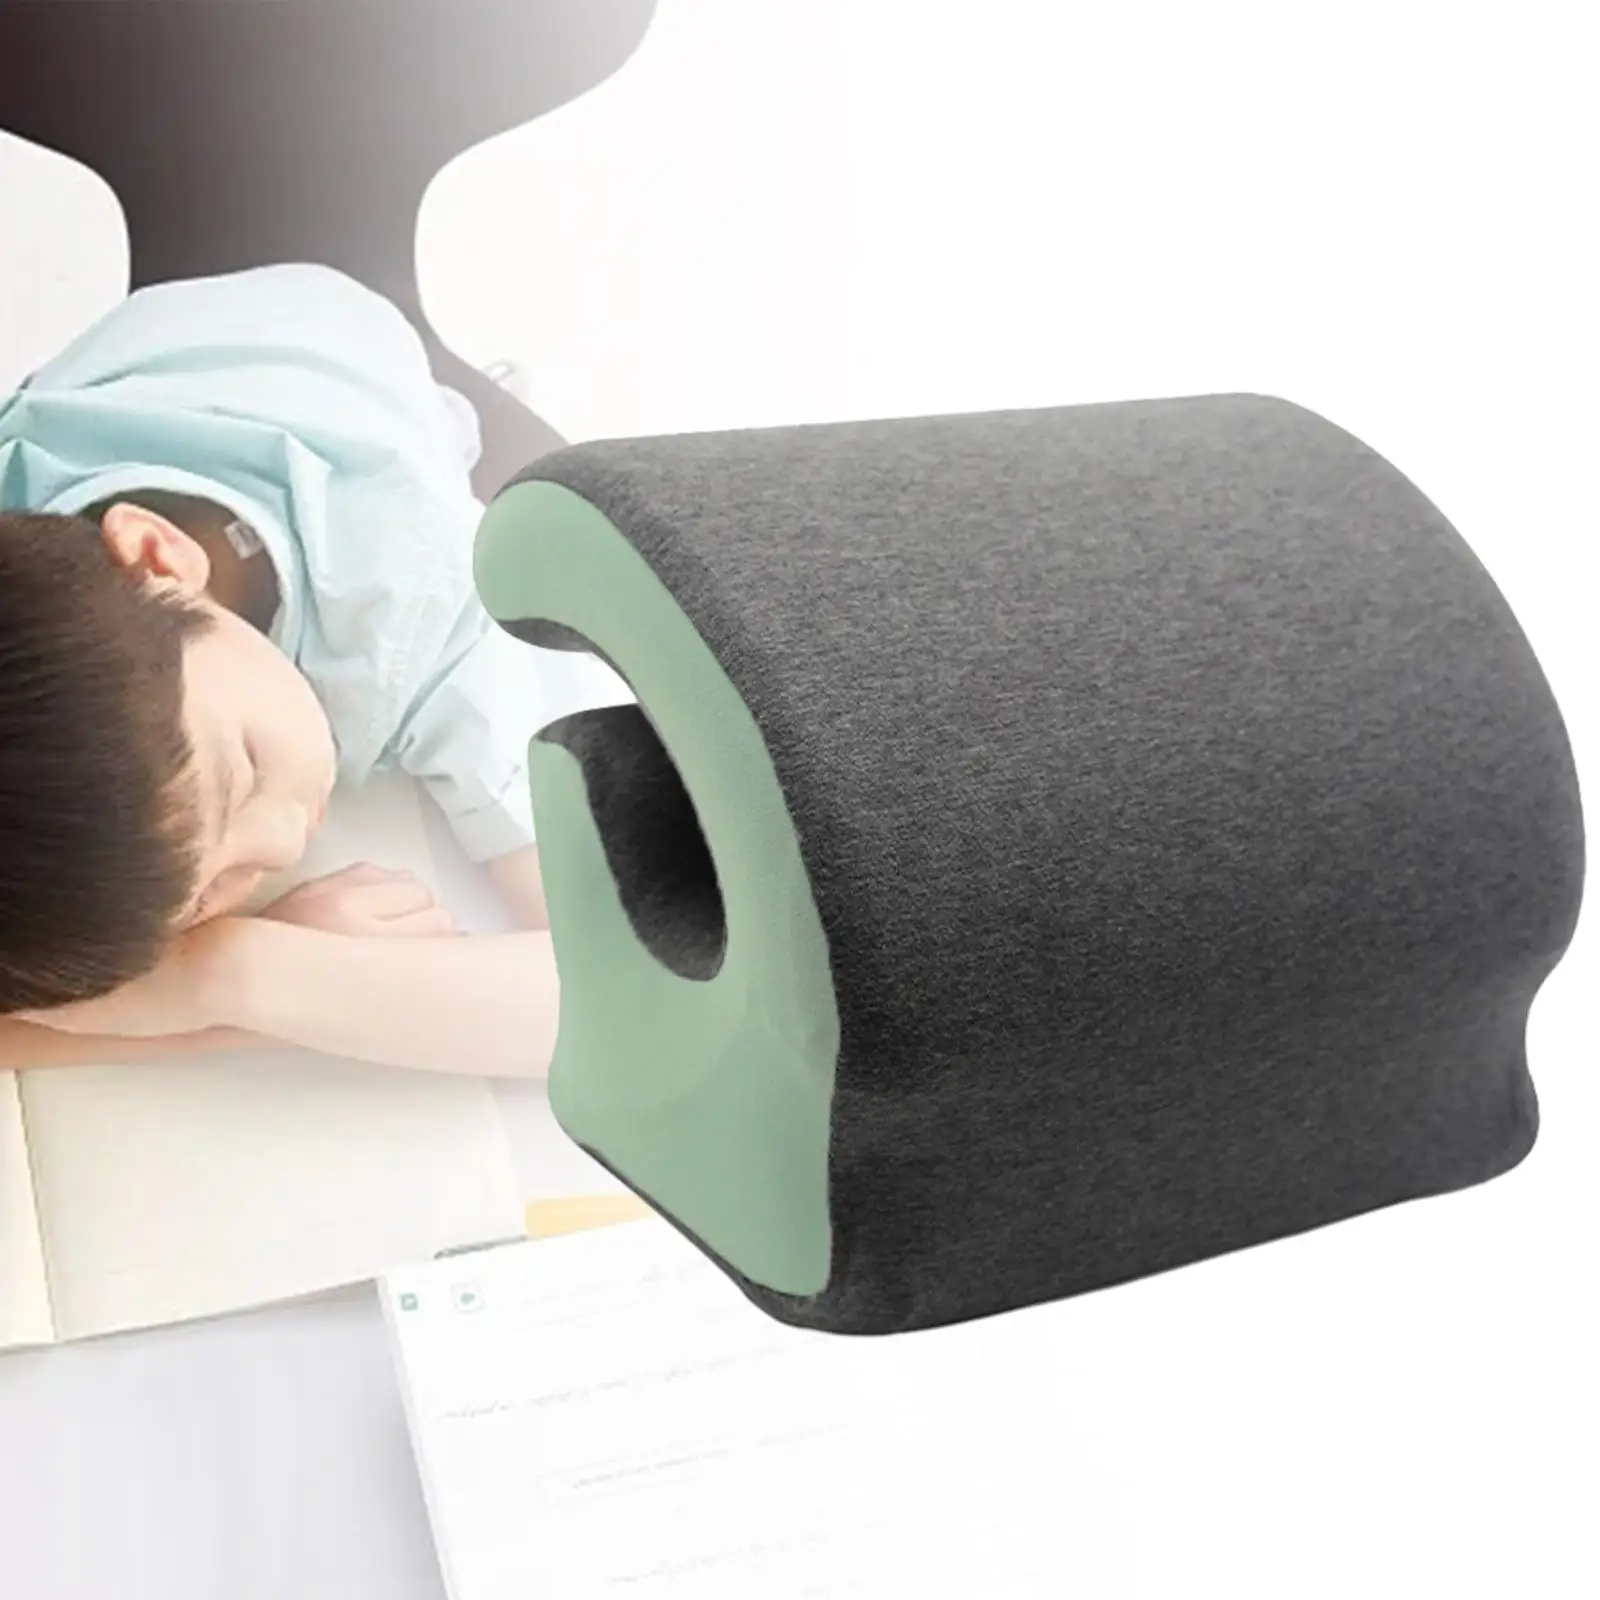 Desk Napping Pillow Removable Cover Sleeping Adults Comfortable Washable Portable Travel Pillow for Airplane School Car Train